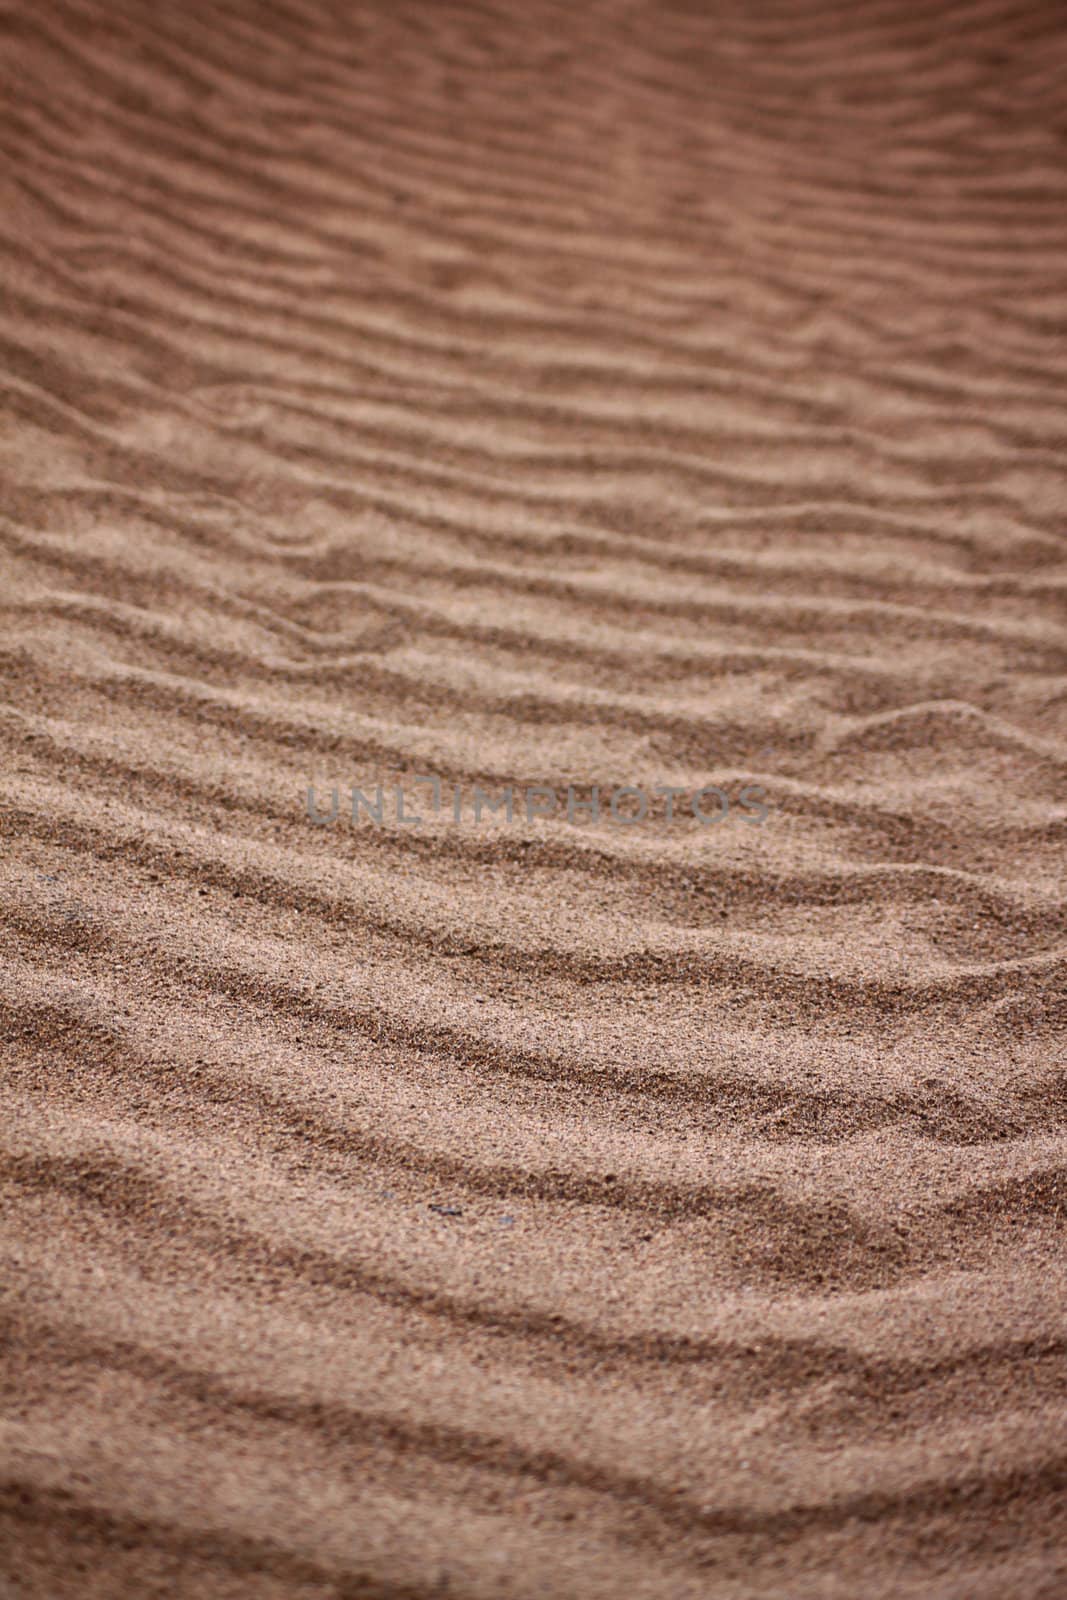 A portrait format image of ripples in the sand made by the outgoing tide.